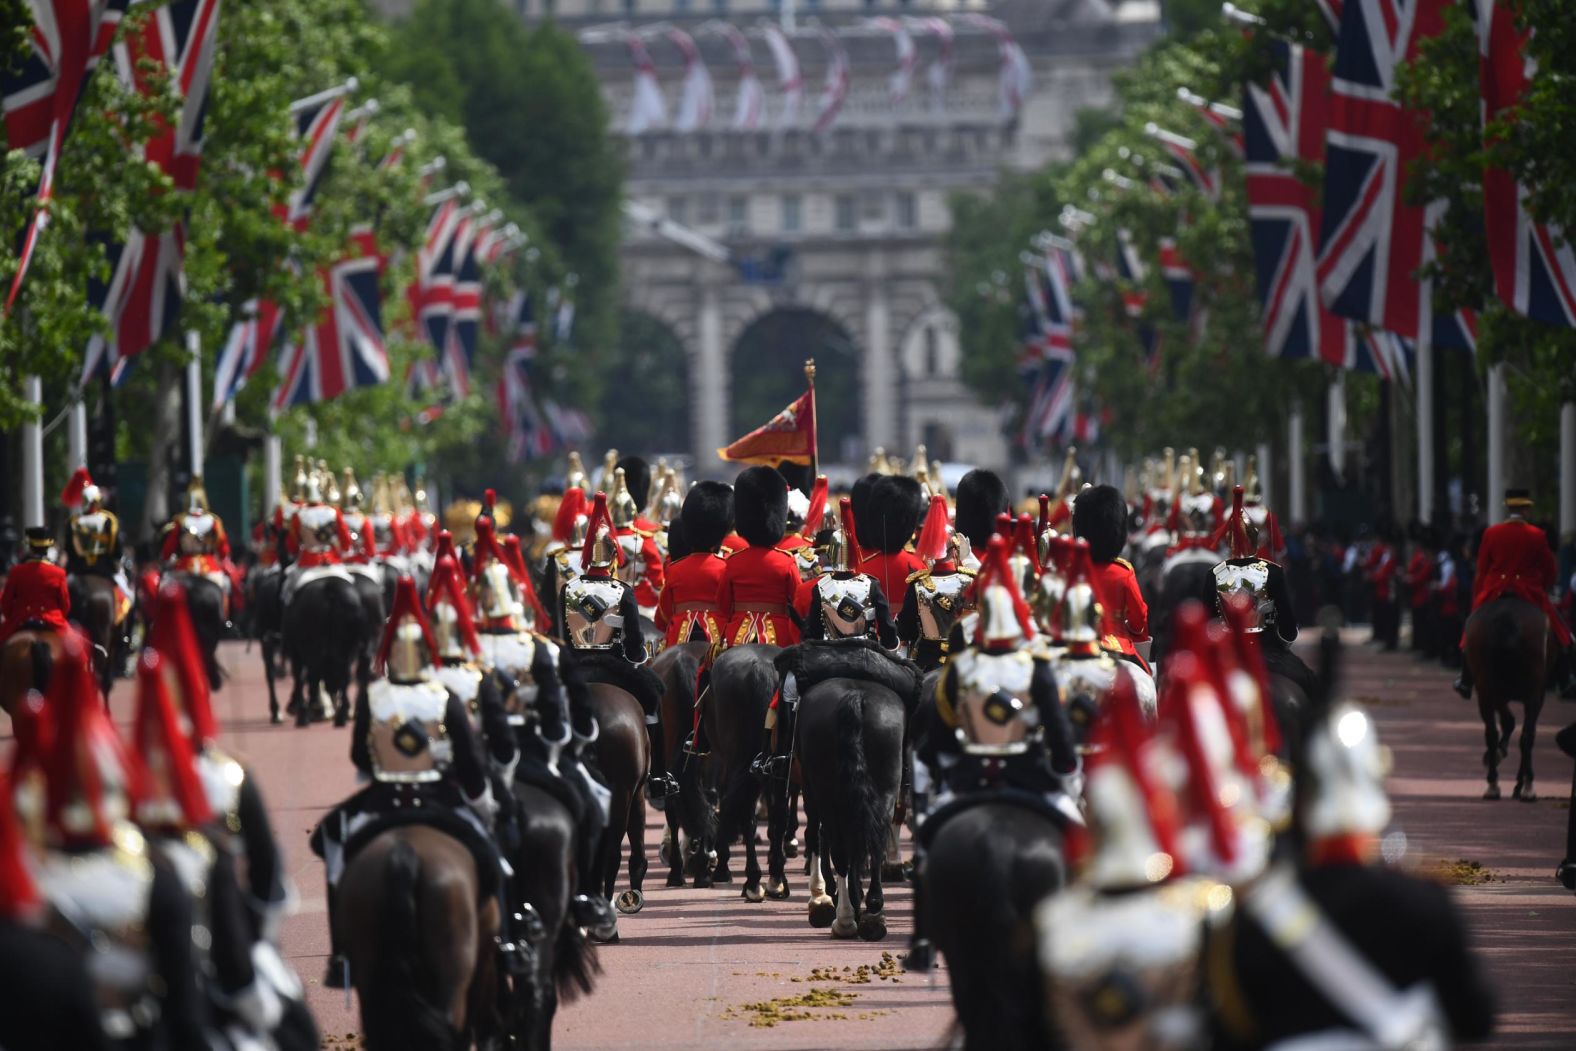 Soldiers make their way from Buckingham Palace to Horse Guards Parade in London ahead of Trooping the Colour.